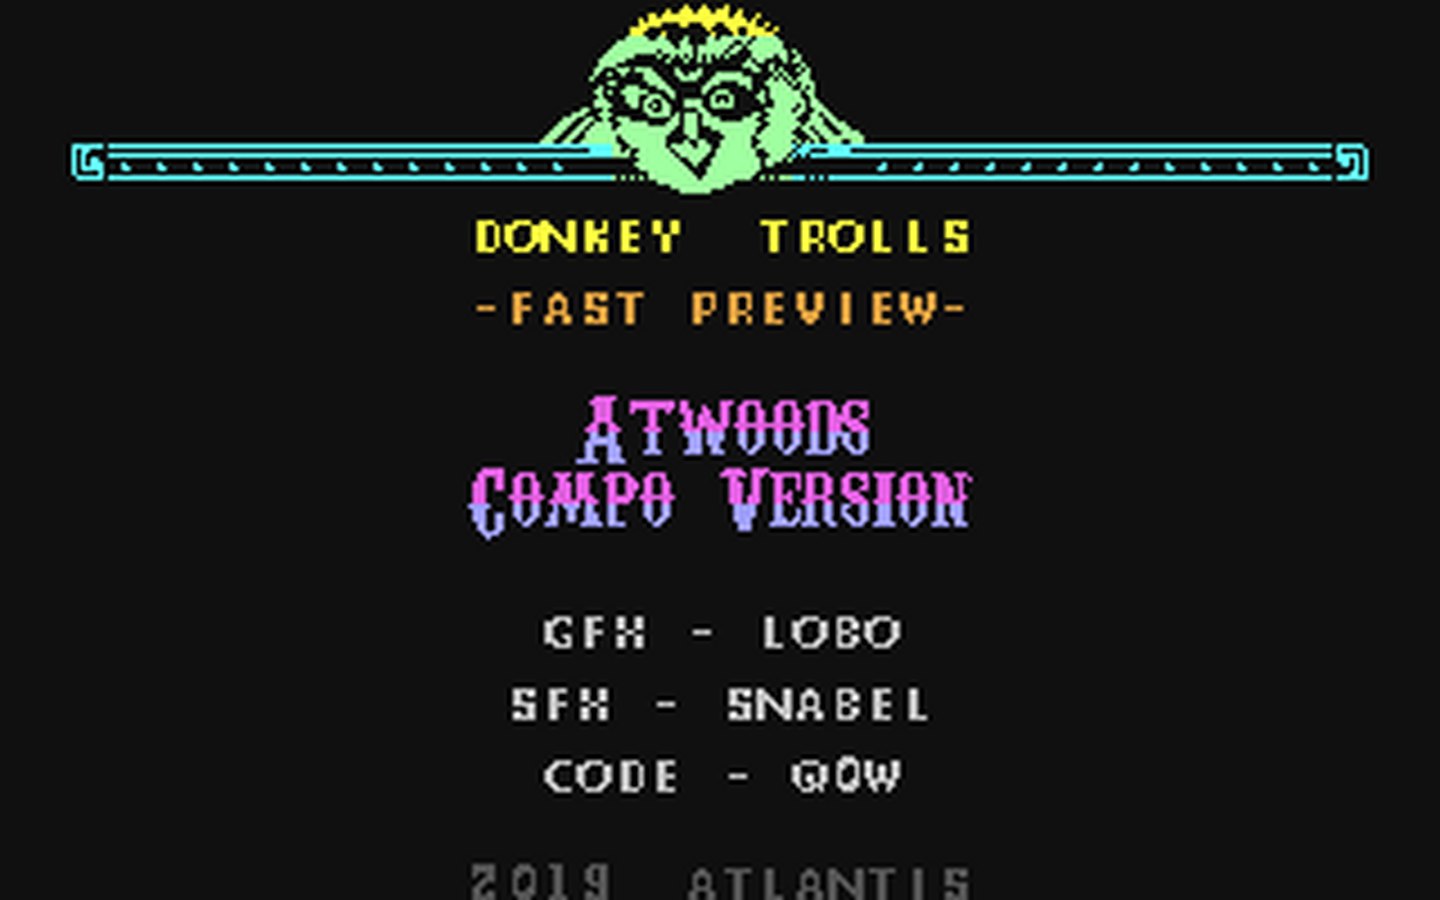 C64 GameBase Donkey_Trolls_[Preview] (Preview) 2019